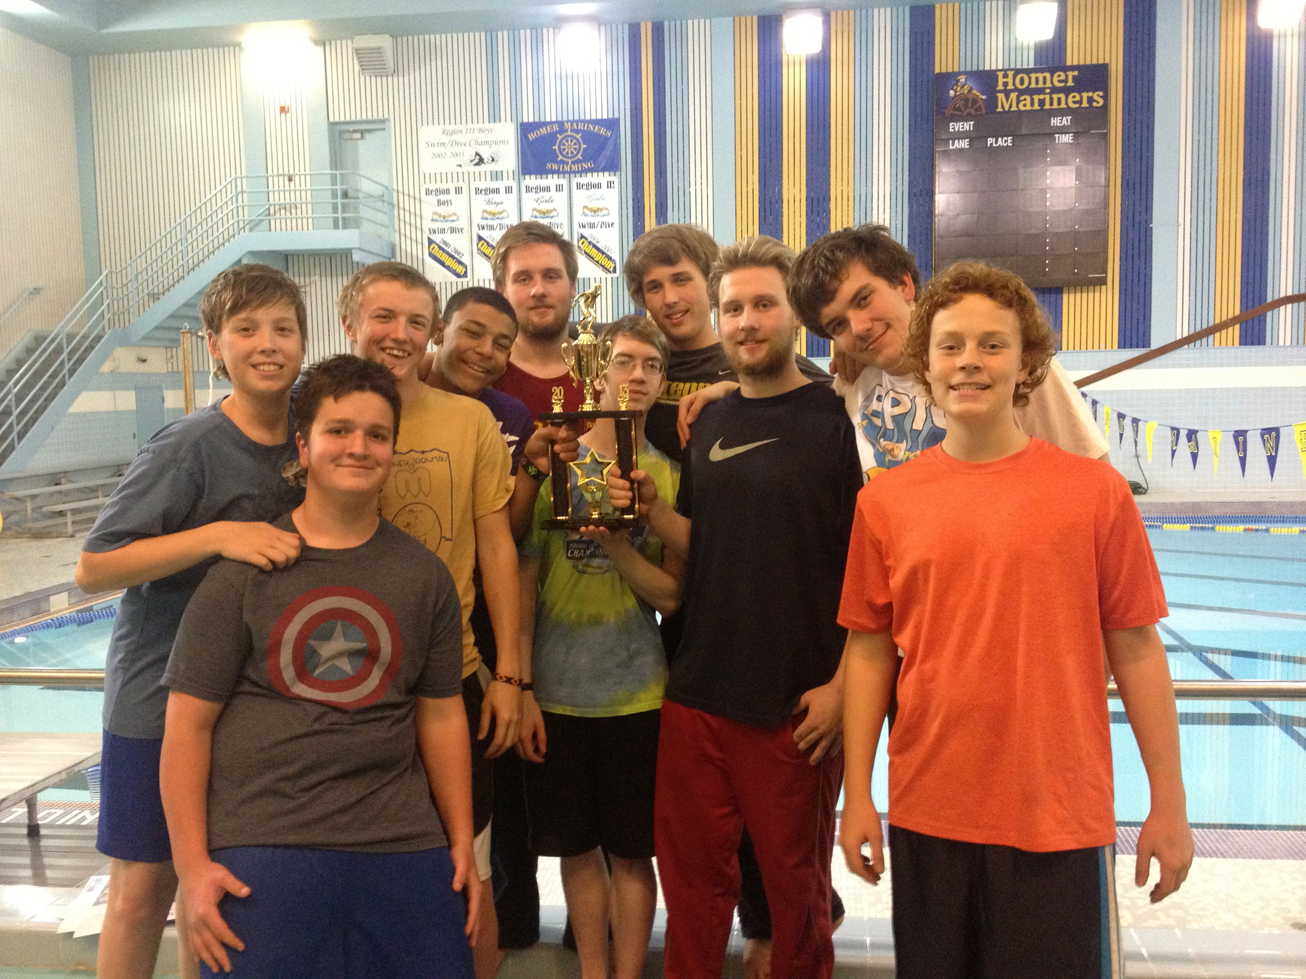 Showing off their hard-earned first-place trophy are Mariner swimmers (from left) Zachary Nelson, Hyram Dory, Greg Smith, Charlie Sadler, Mark Nagle, Cyrus Cowan, Remi Nagle, James Nagle, Thomas Vanek and Leo Castellani.-Photo by Shannon Reid